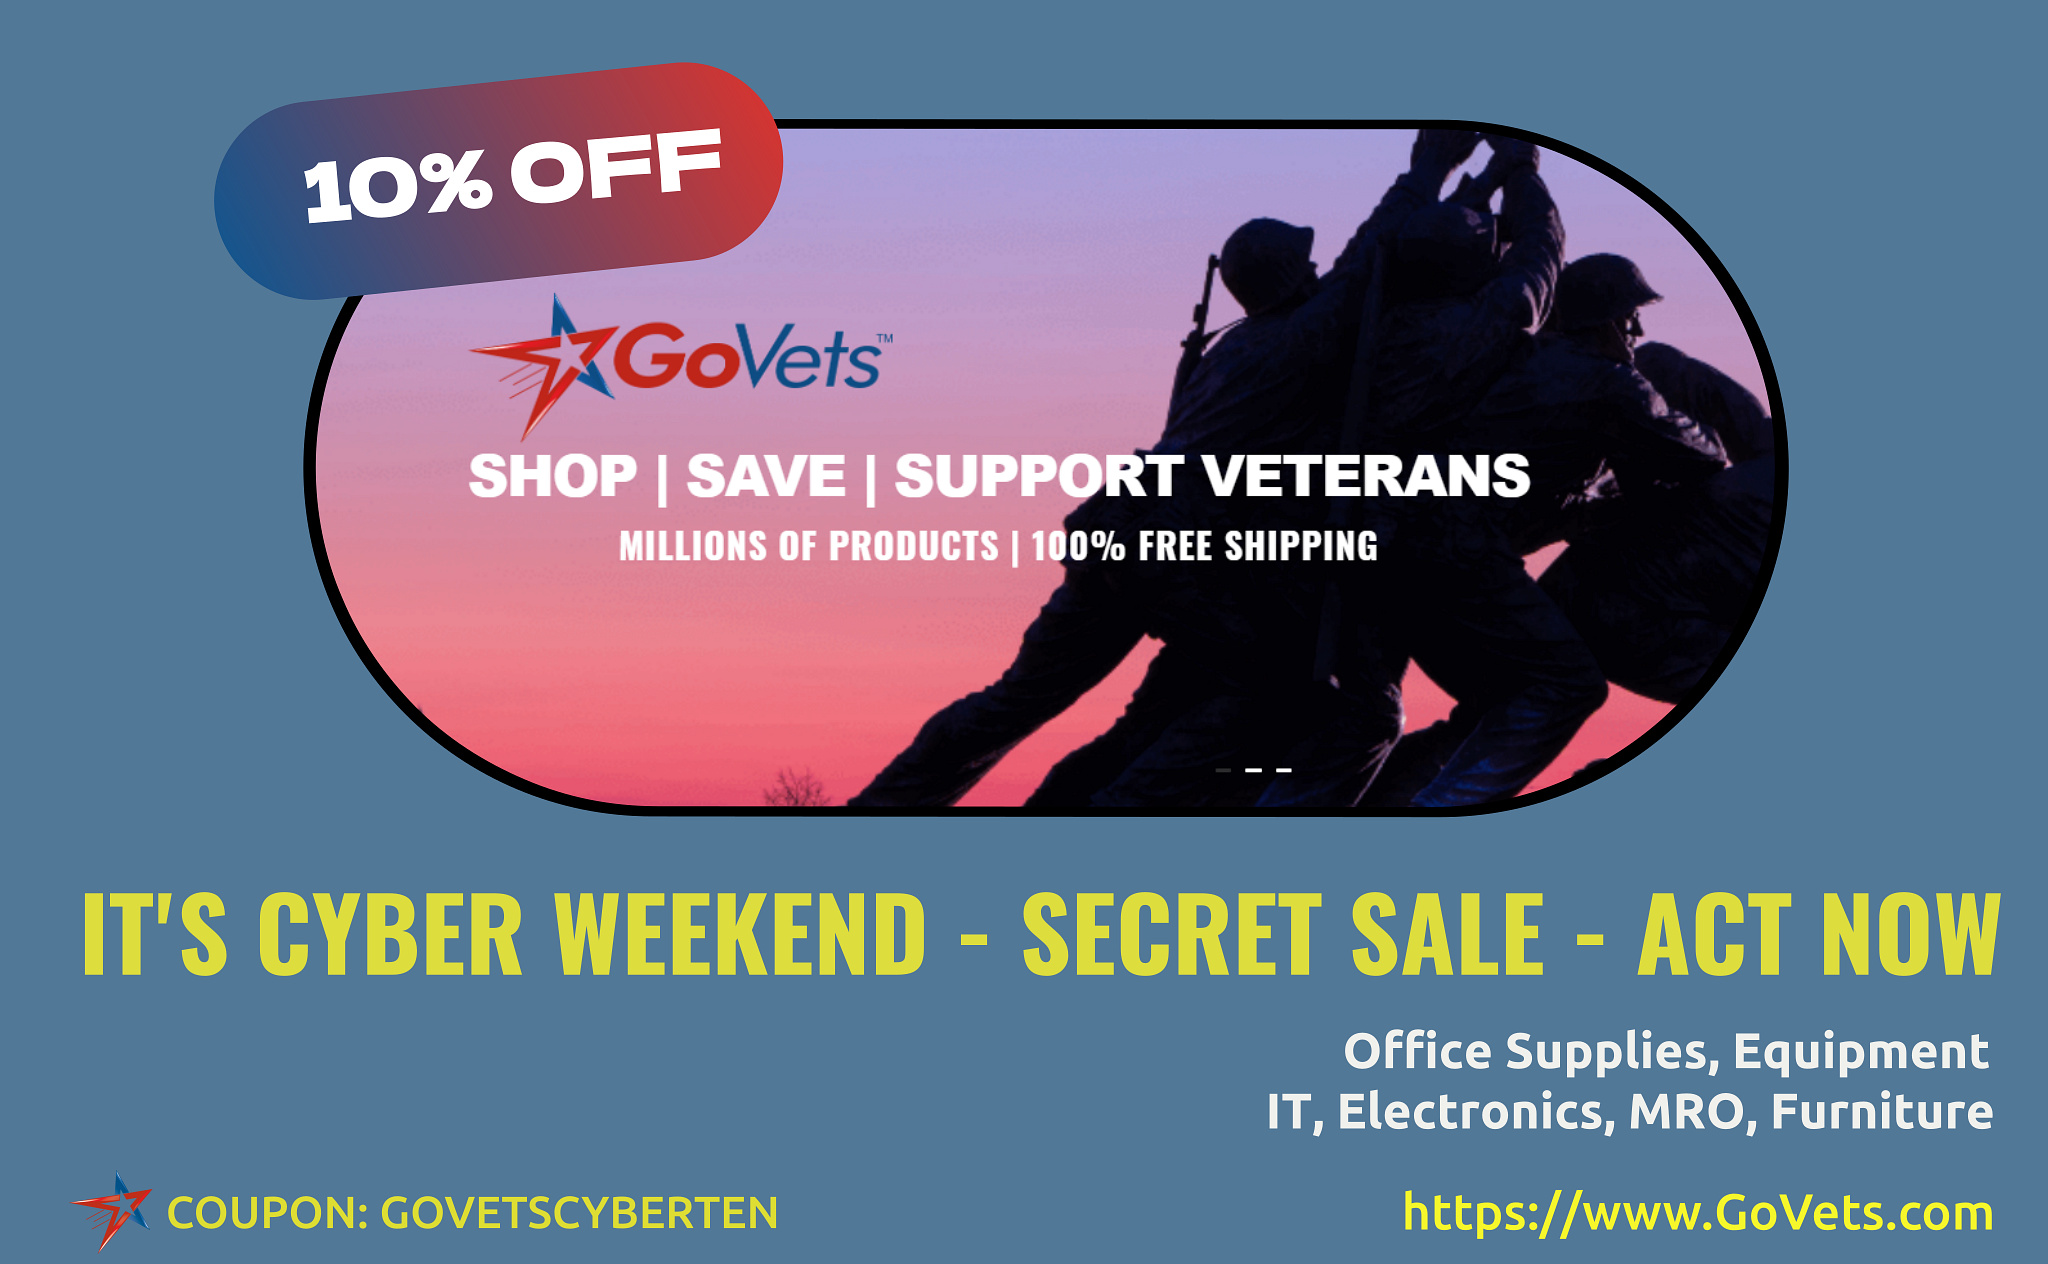 Claim your 10% Discount on GoVets - Items up to $150.